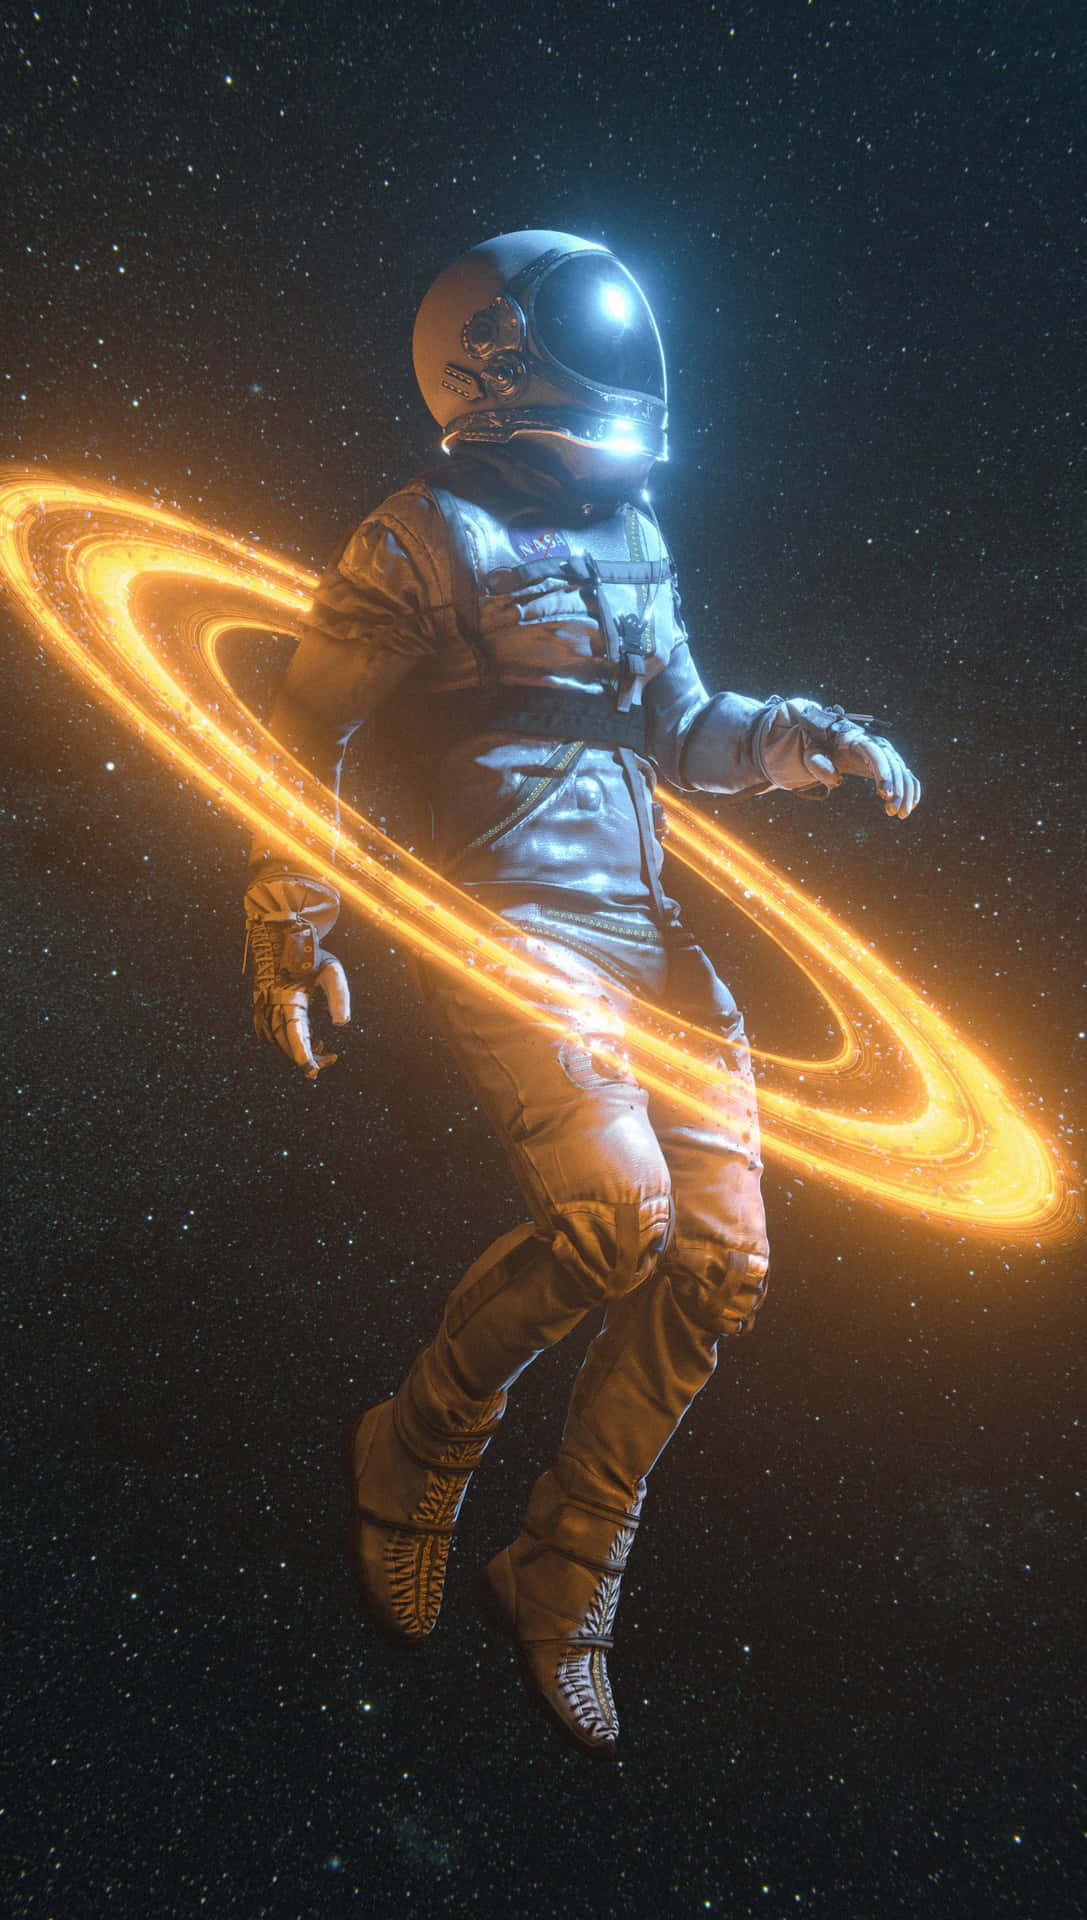 An Astronaut In Space With A Glowing Ring Around Him Wallpaper